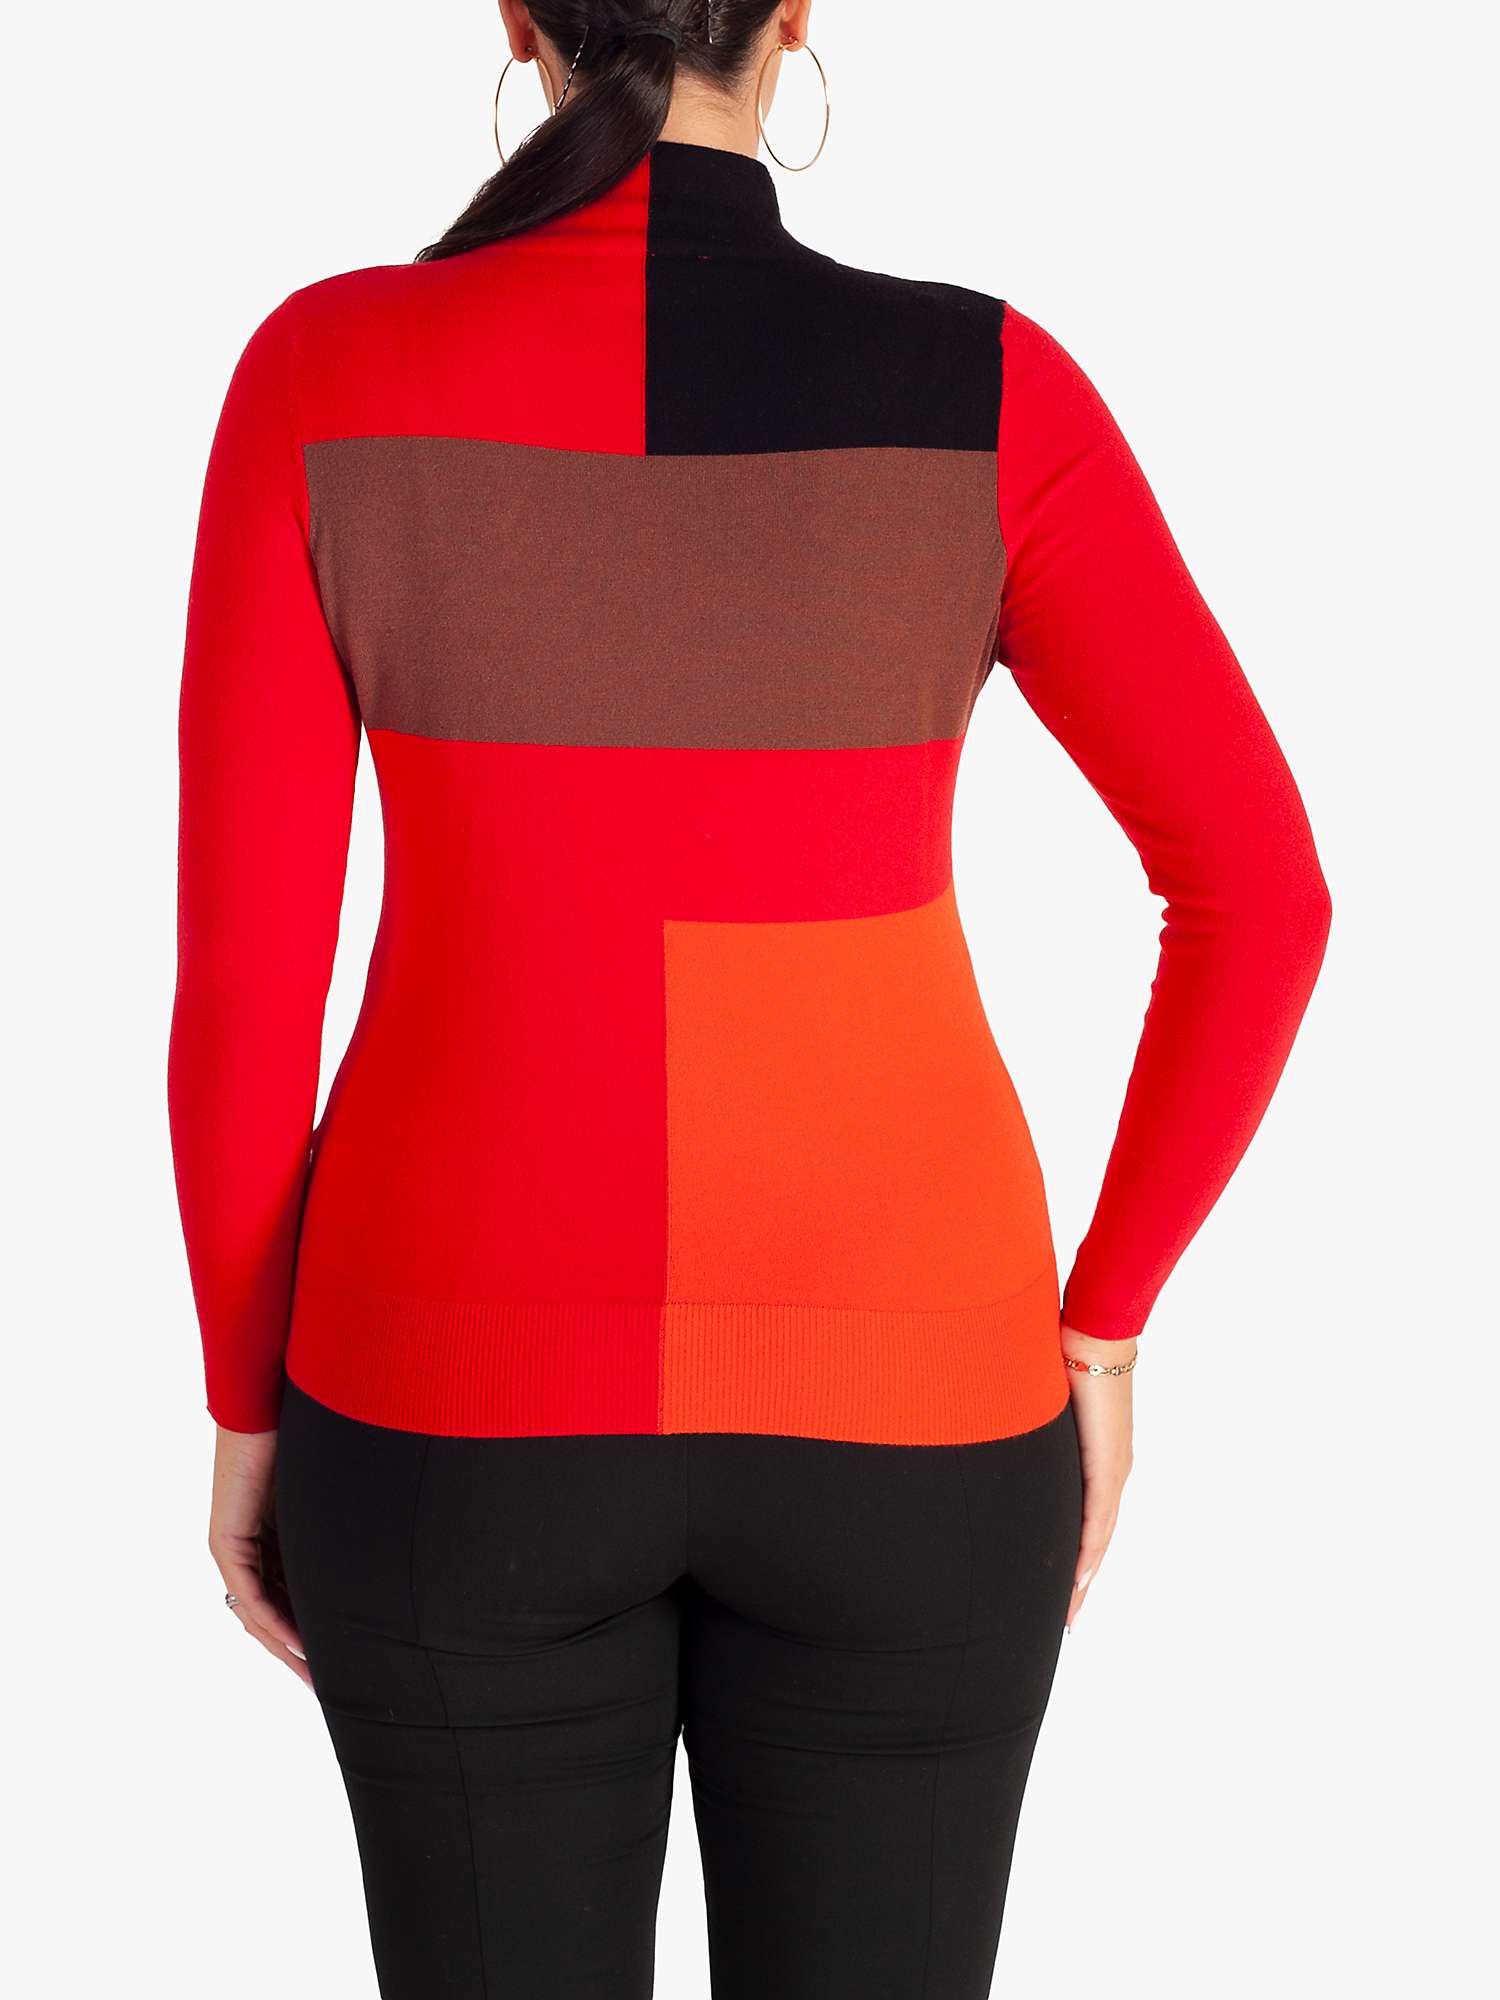 Buy chesca Shapes Jumper, Red Online at johnlewis.com